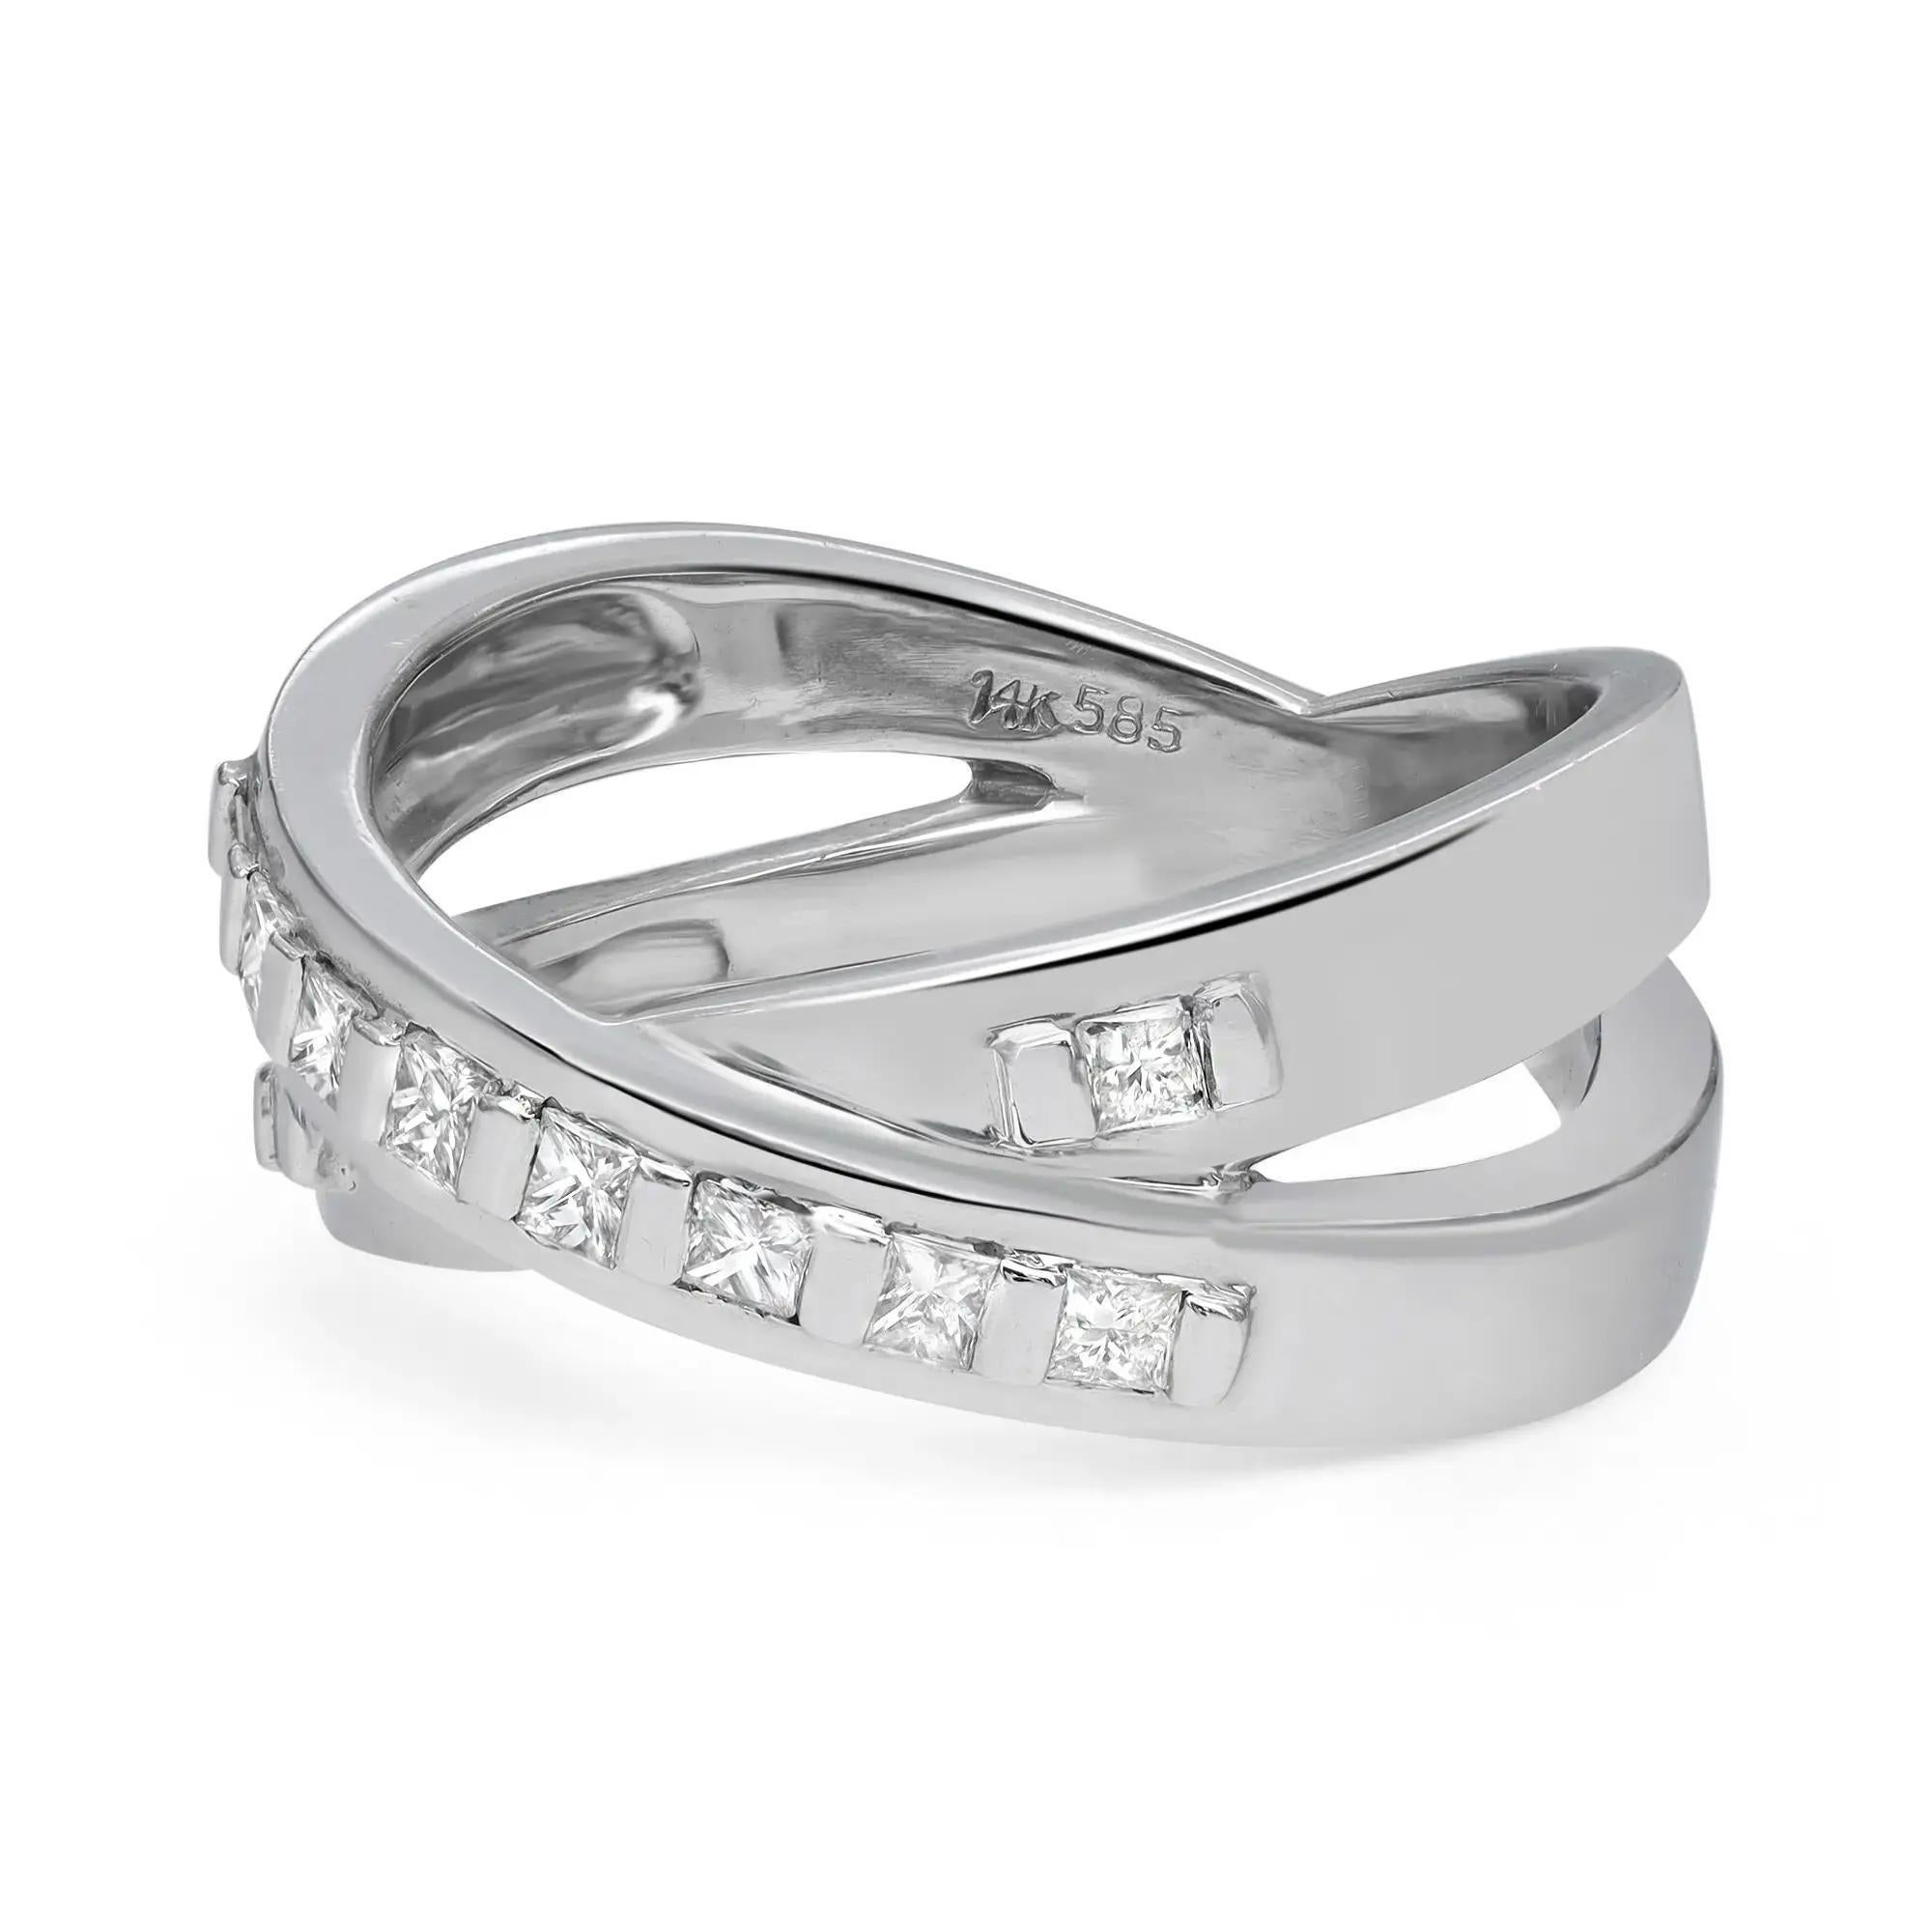 This beautiful crisscross band ring is crafted in 14k white gold and encrusted with 10 princess cut diamonds weighing 0.50 carat. Diamond quality: color I and clarity SI. Ring size: 7.5. Total weight: 7.97 grams. A must-have for your jewelry